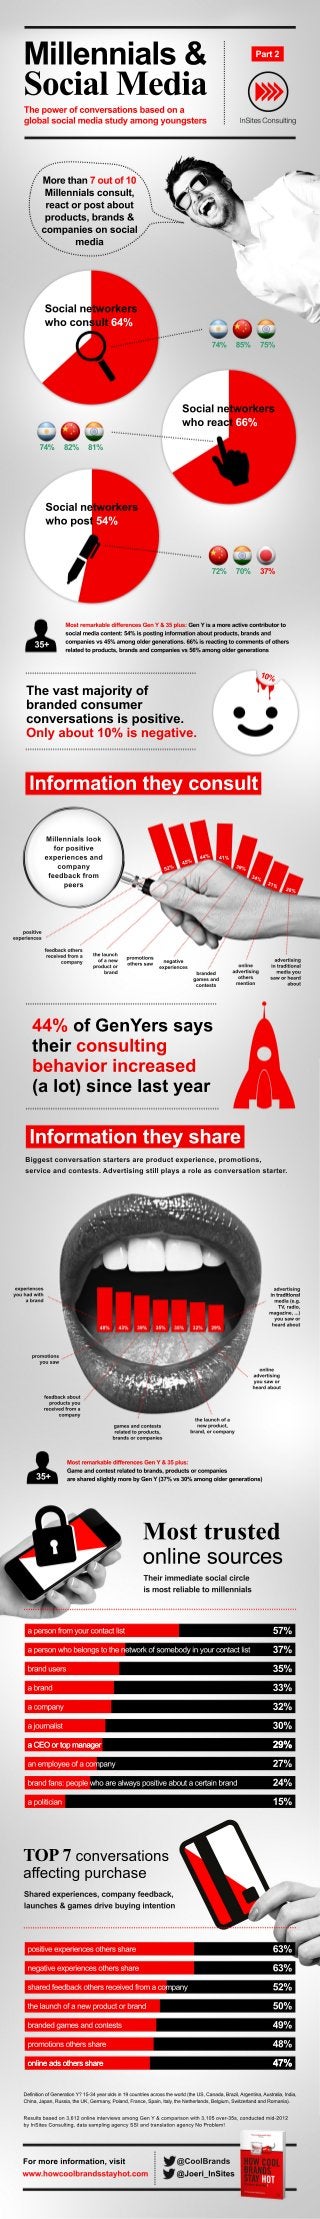 Infographic: Millennials & Social Media - The power of conversations based on a global social media study among youngsters